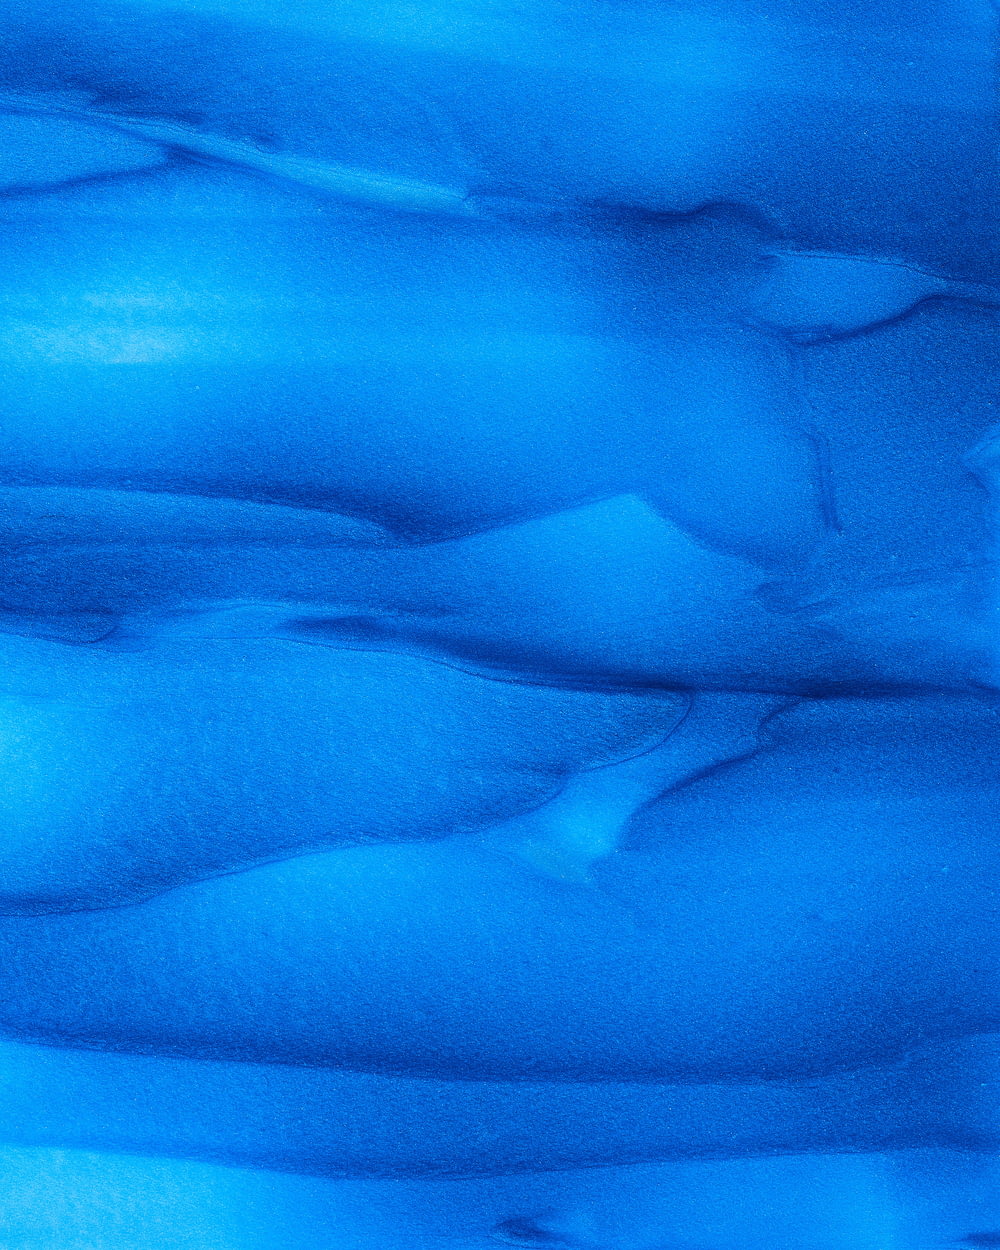 a close up of a blue substance in the water